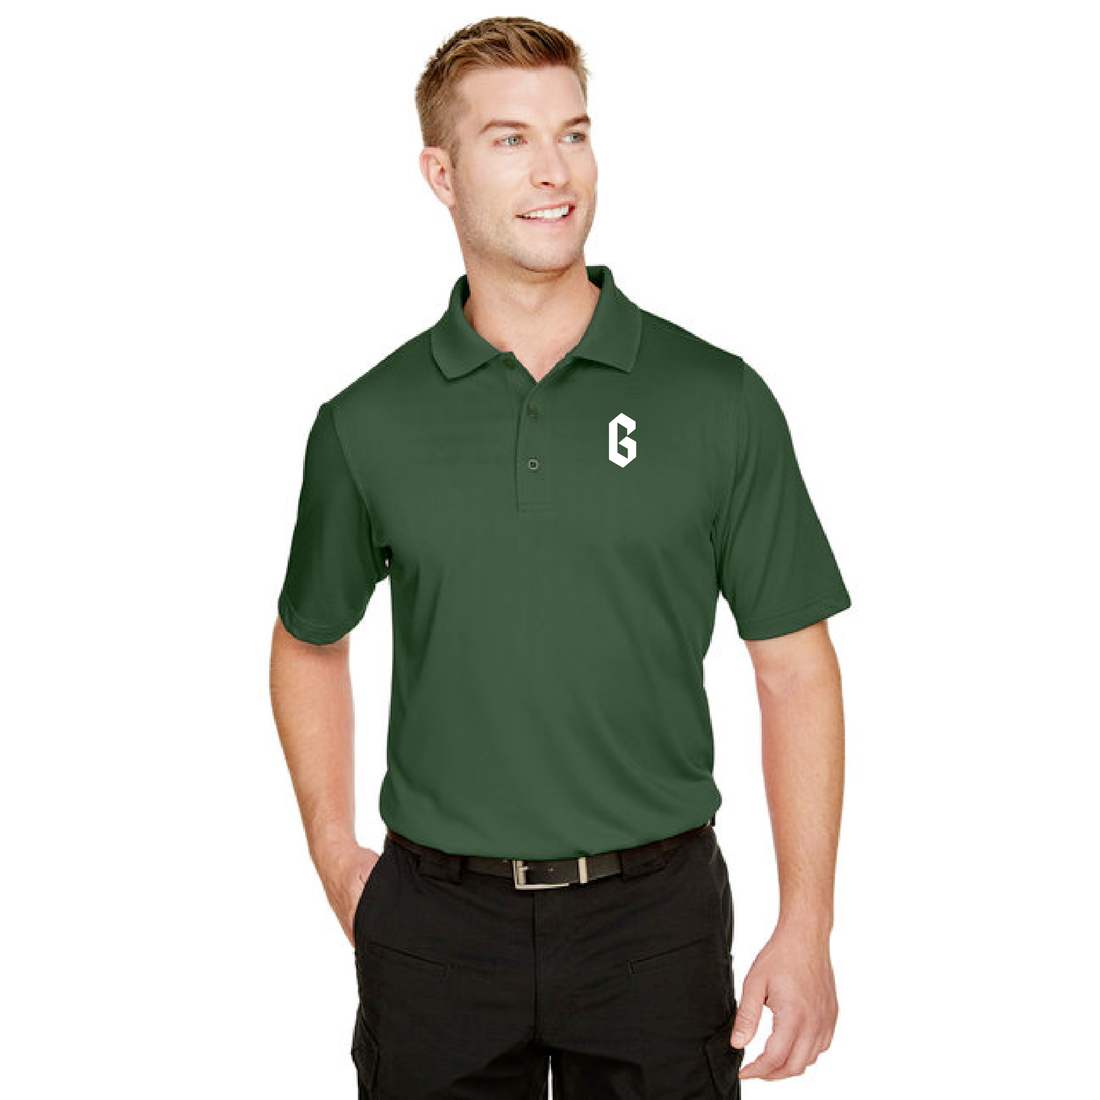 "The Green" Staff G Polos